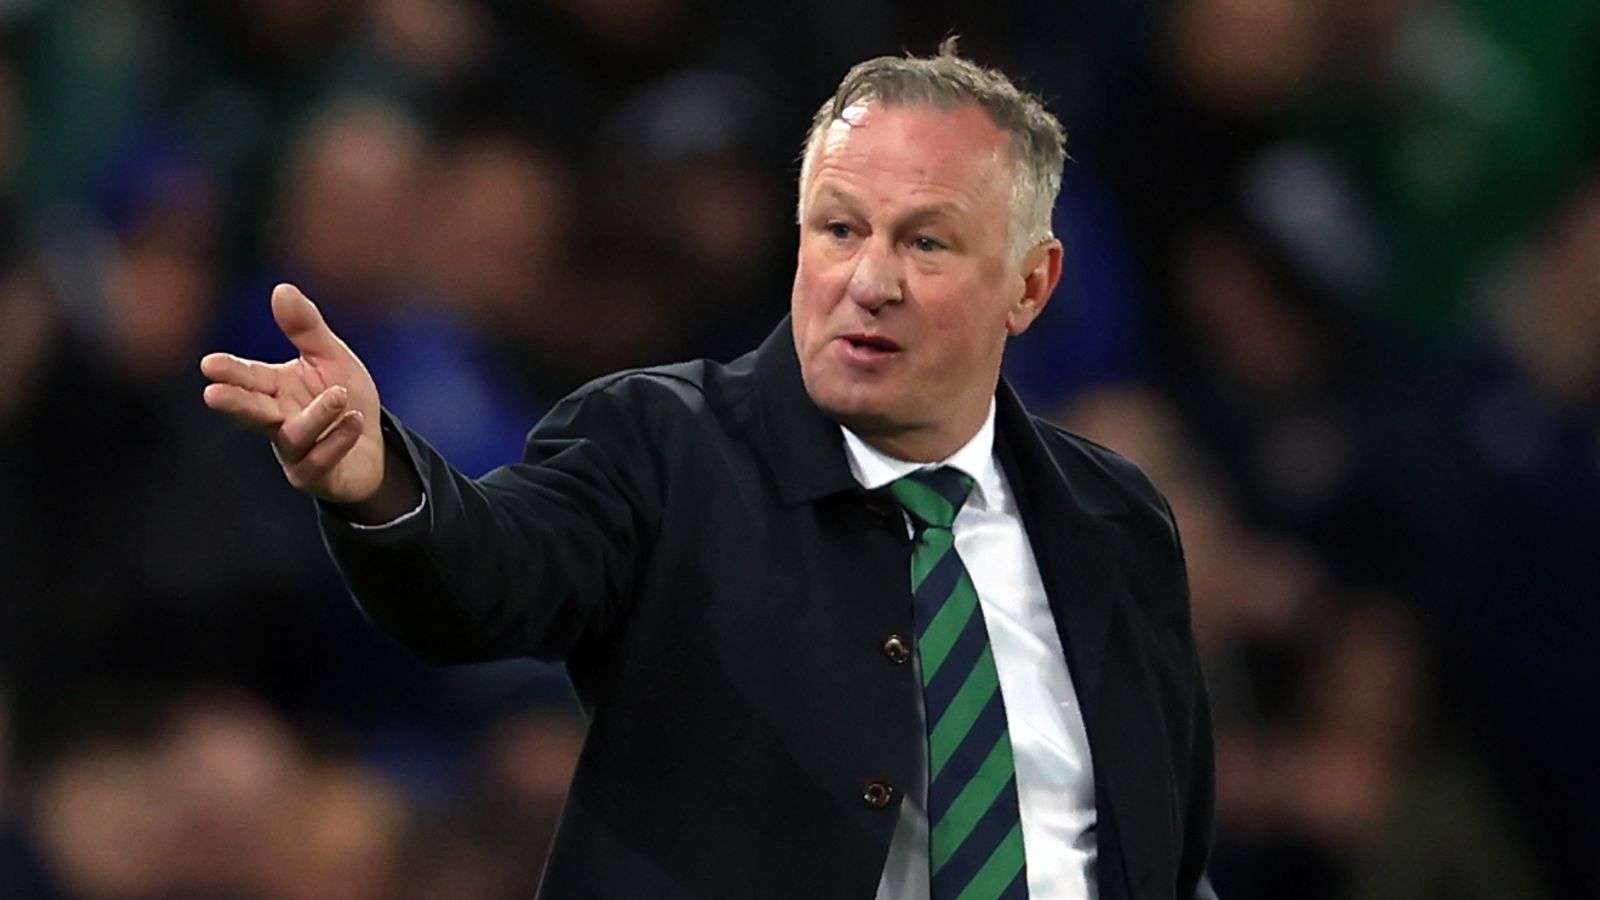 Aberdeen manager search: Michael O’Neill to stay with Northern Ireland